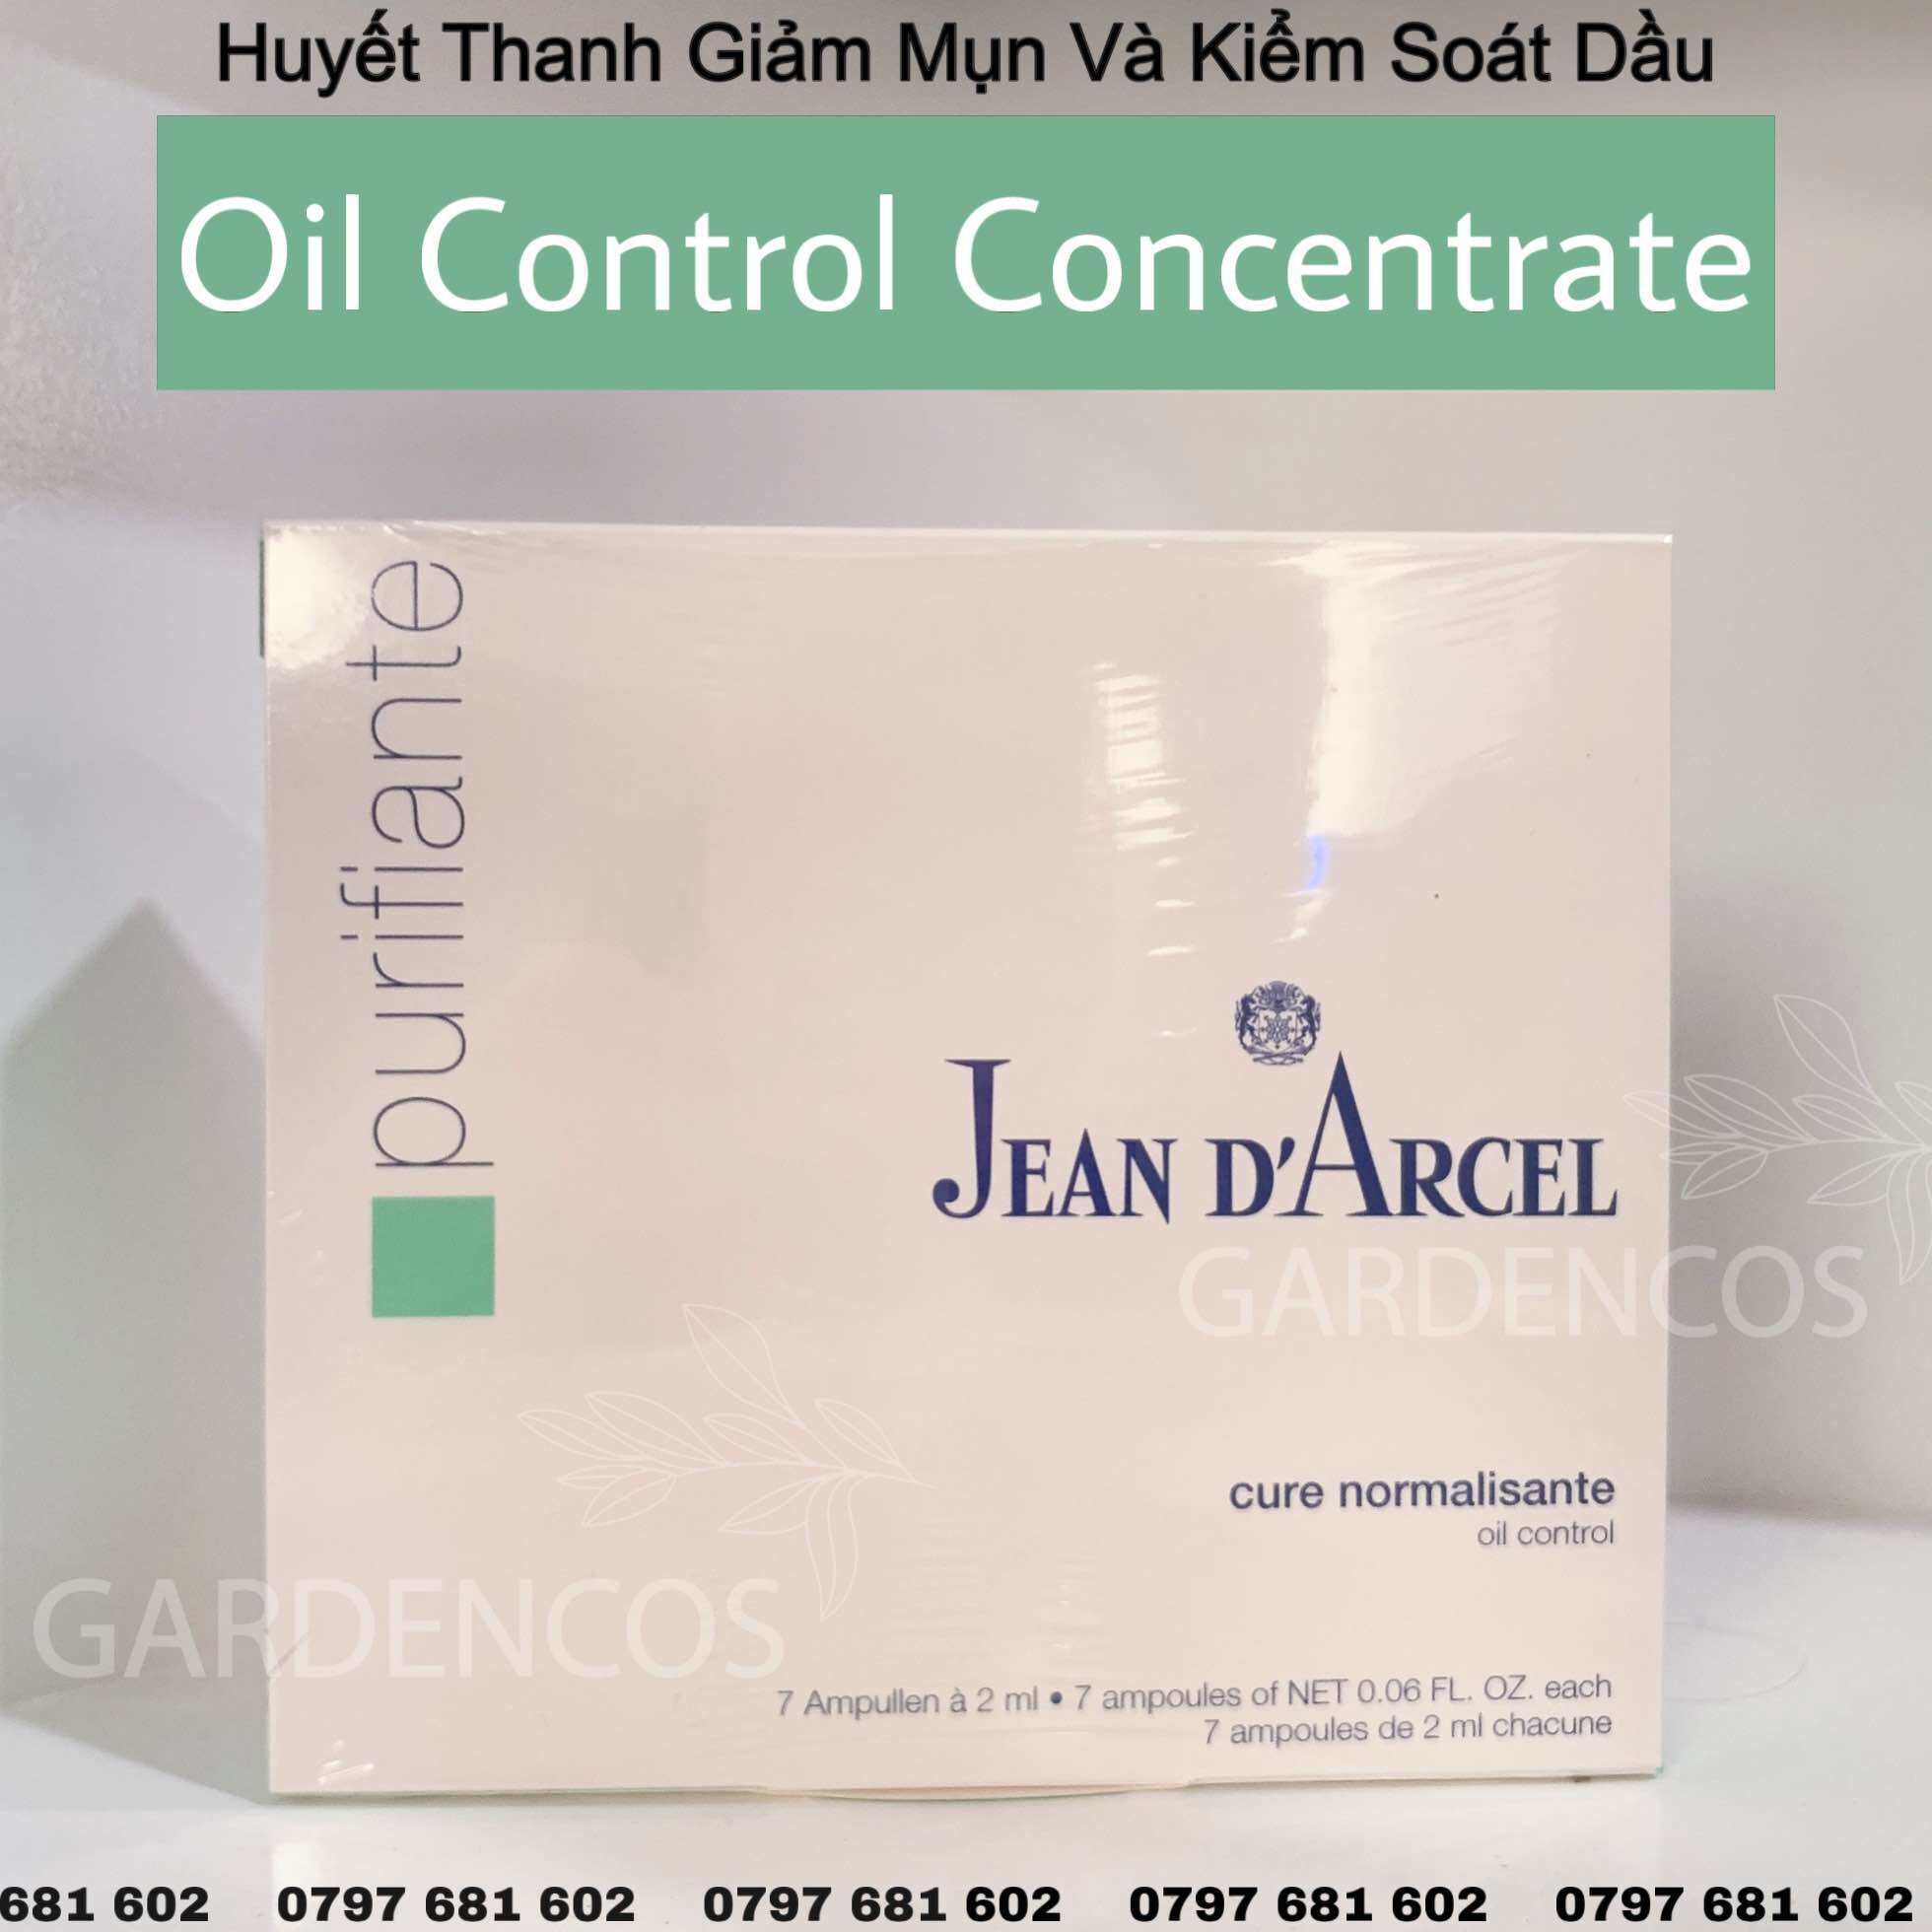 Huyết Thanh Giảm Mụn Jean D arcel Oil Control Concentrate - J42 - Gardencos